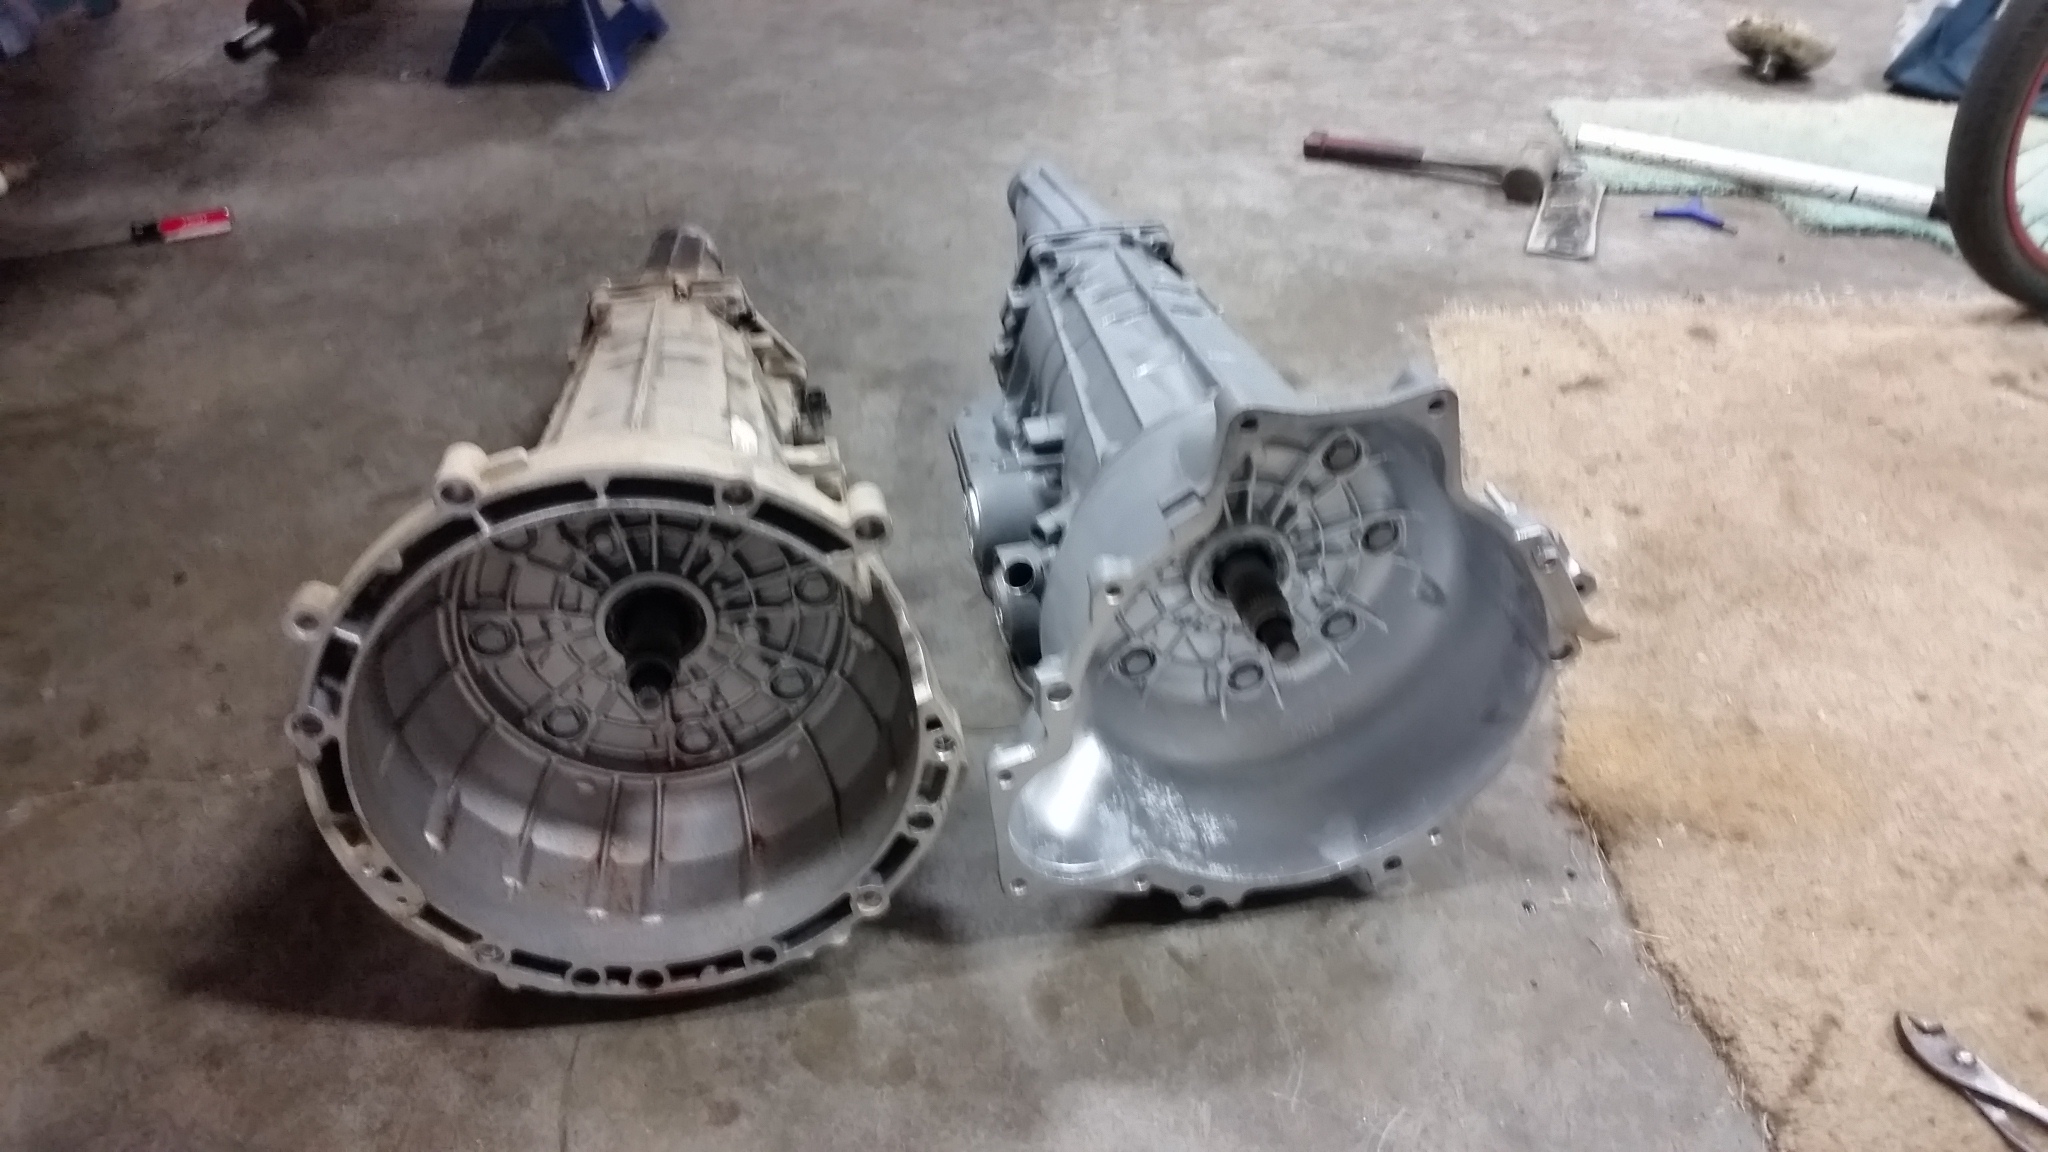 Left is my tranmission, right is the transmission this company sent. 
Clearly, the bell housing is the wrong type. 